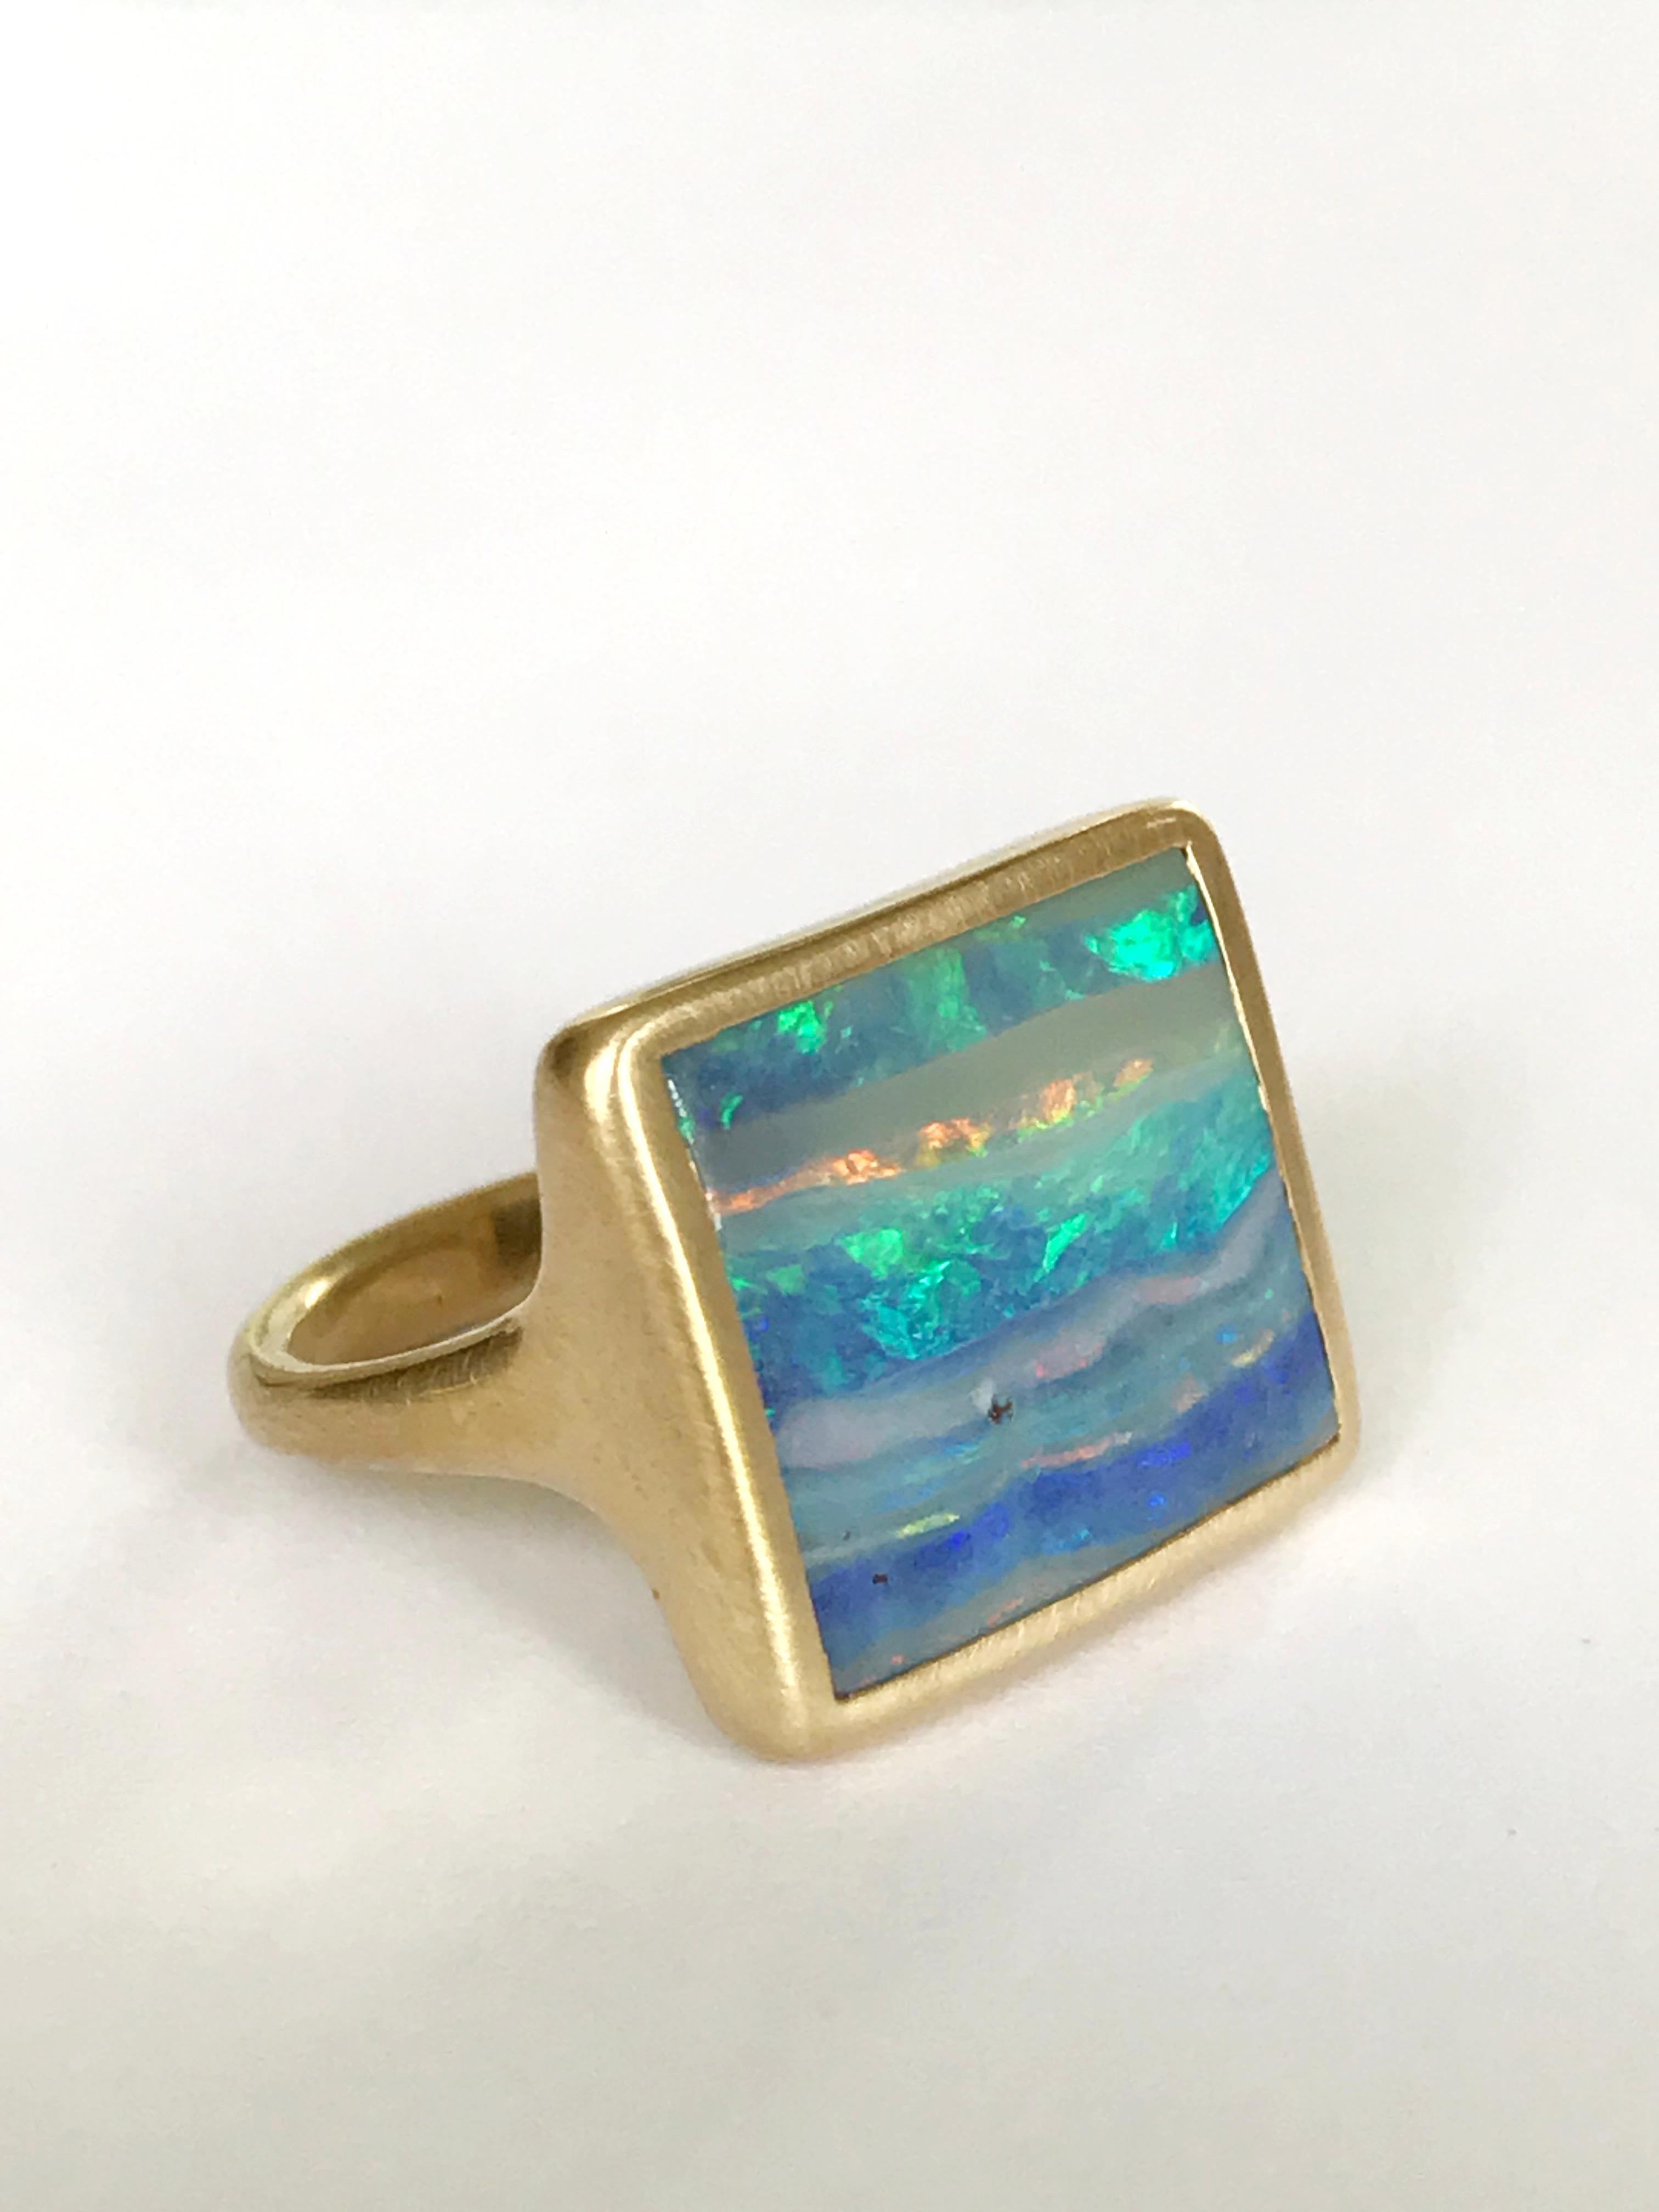 Dalben design One of a kind 18k yellow gold matte finishing ring with a bezel-set lovely Blue-green Australian Boulder Opal .  
This Australian Boulder Opal has the waves seabed colors 
Ring size 7 - EU 54 + re-sizable to most finger sizes.  
Bezel